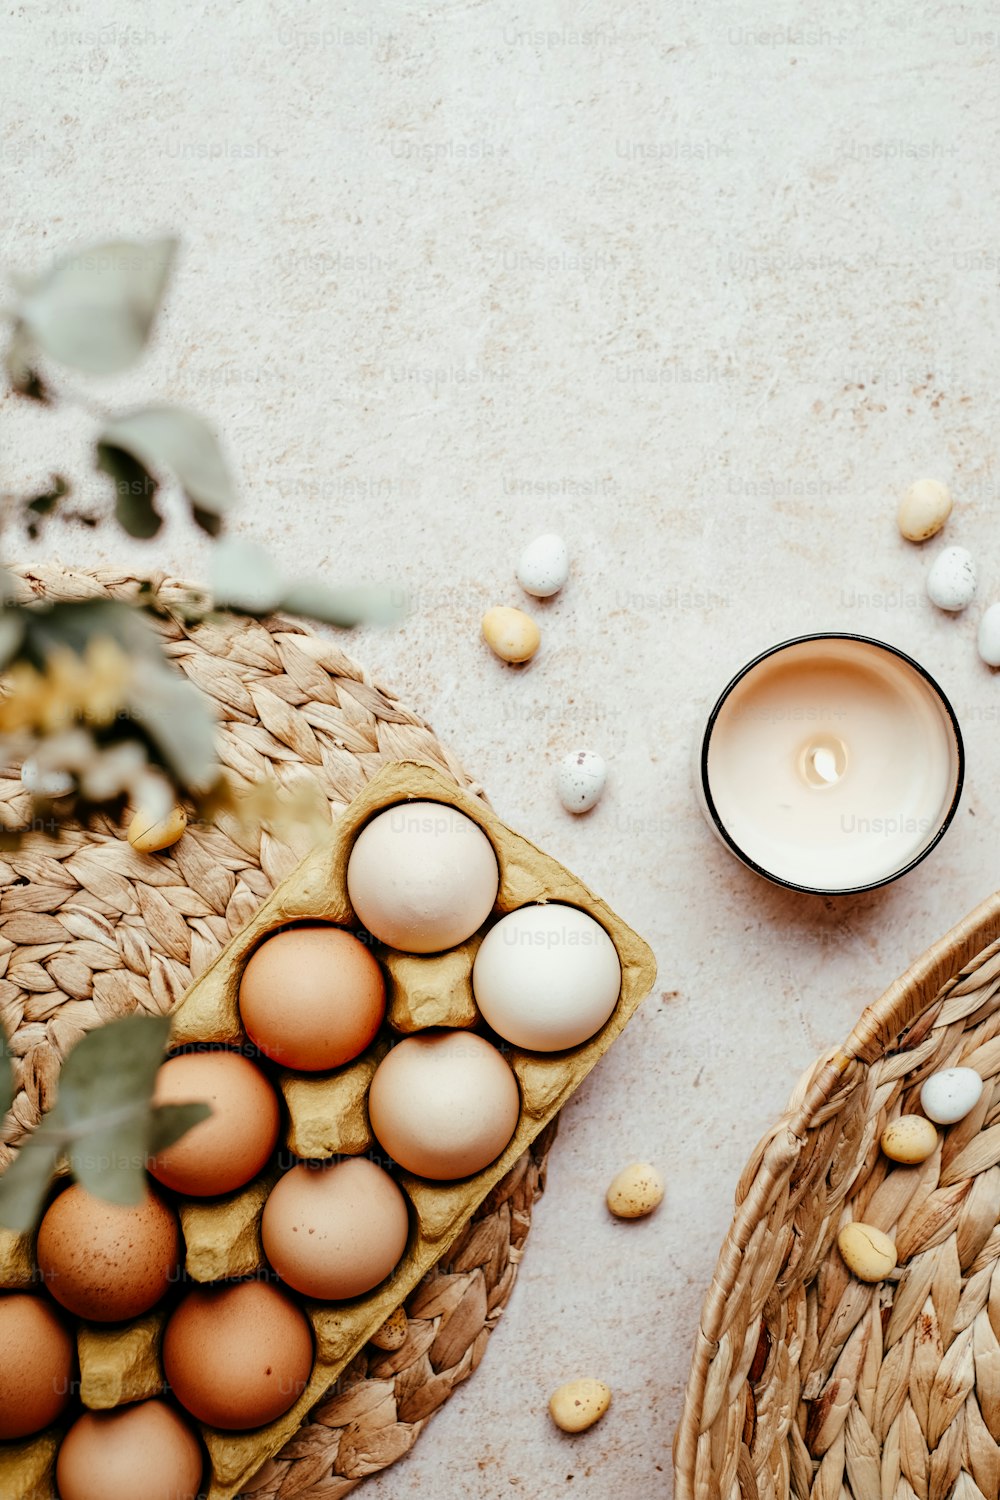 a basket of eggs next to a candle on a table